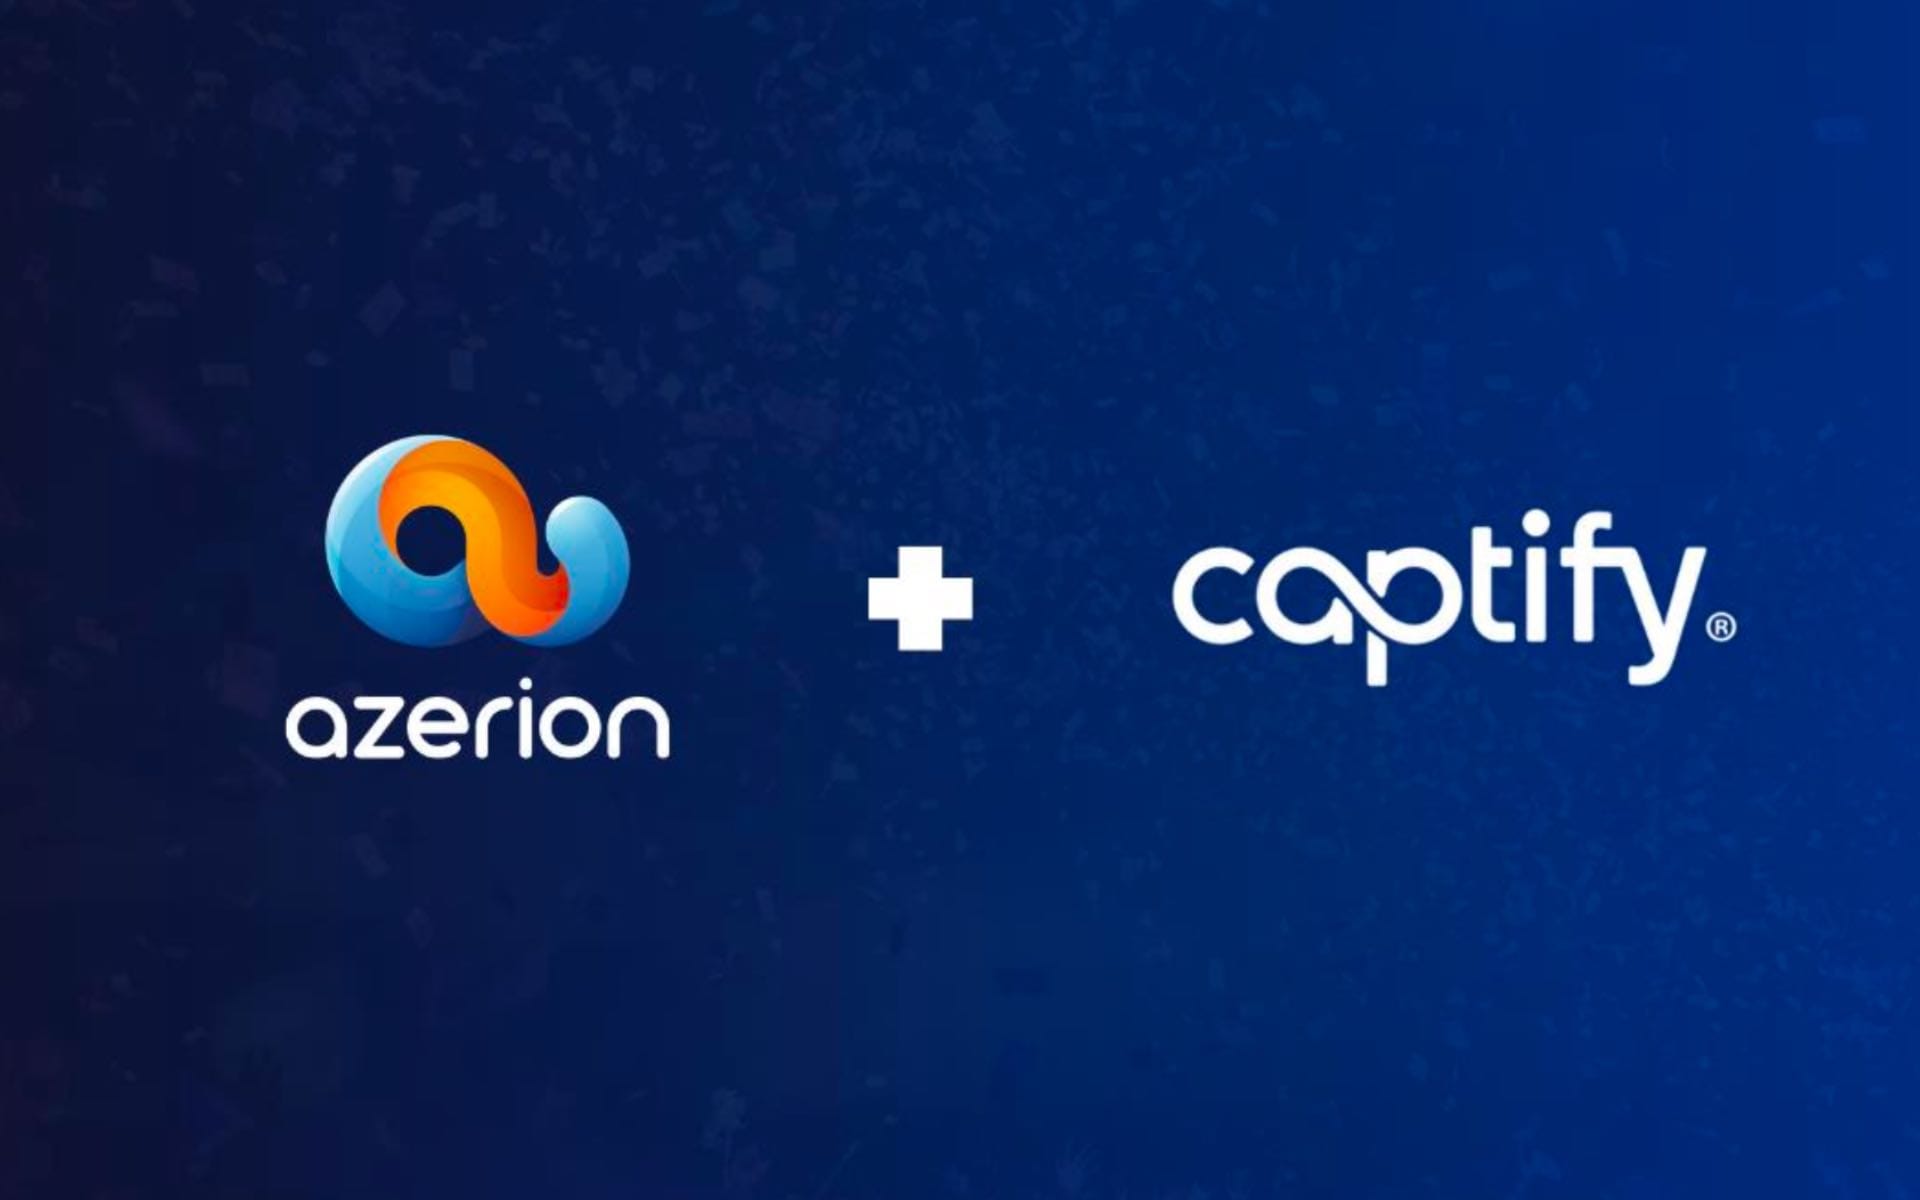 Azerion and Captify